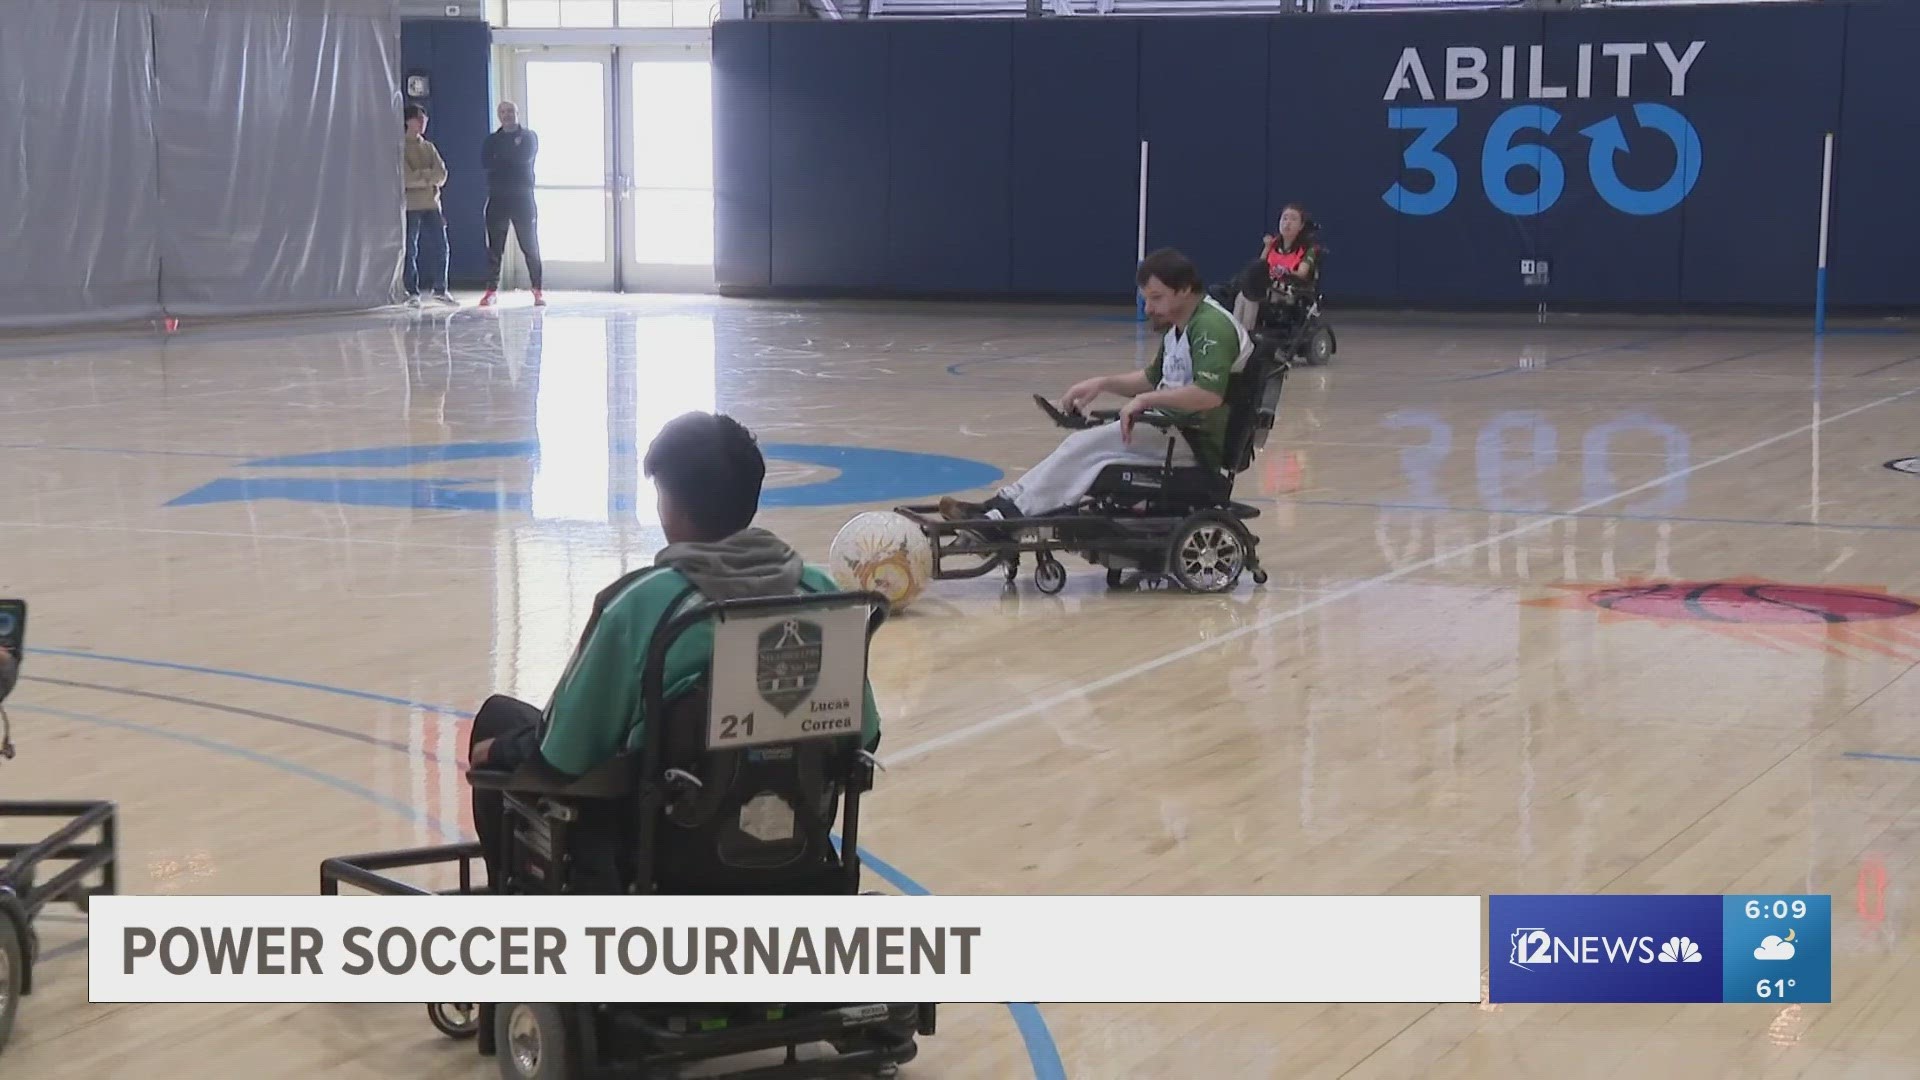 A power soccer tournament is being held at Ability360 in Phoenix some of the best players and teams in the nation. 12News got a look at the action.